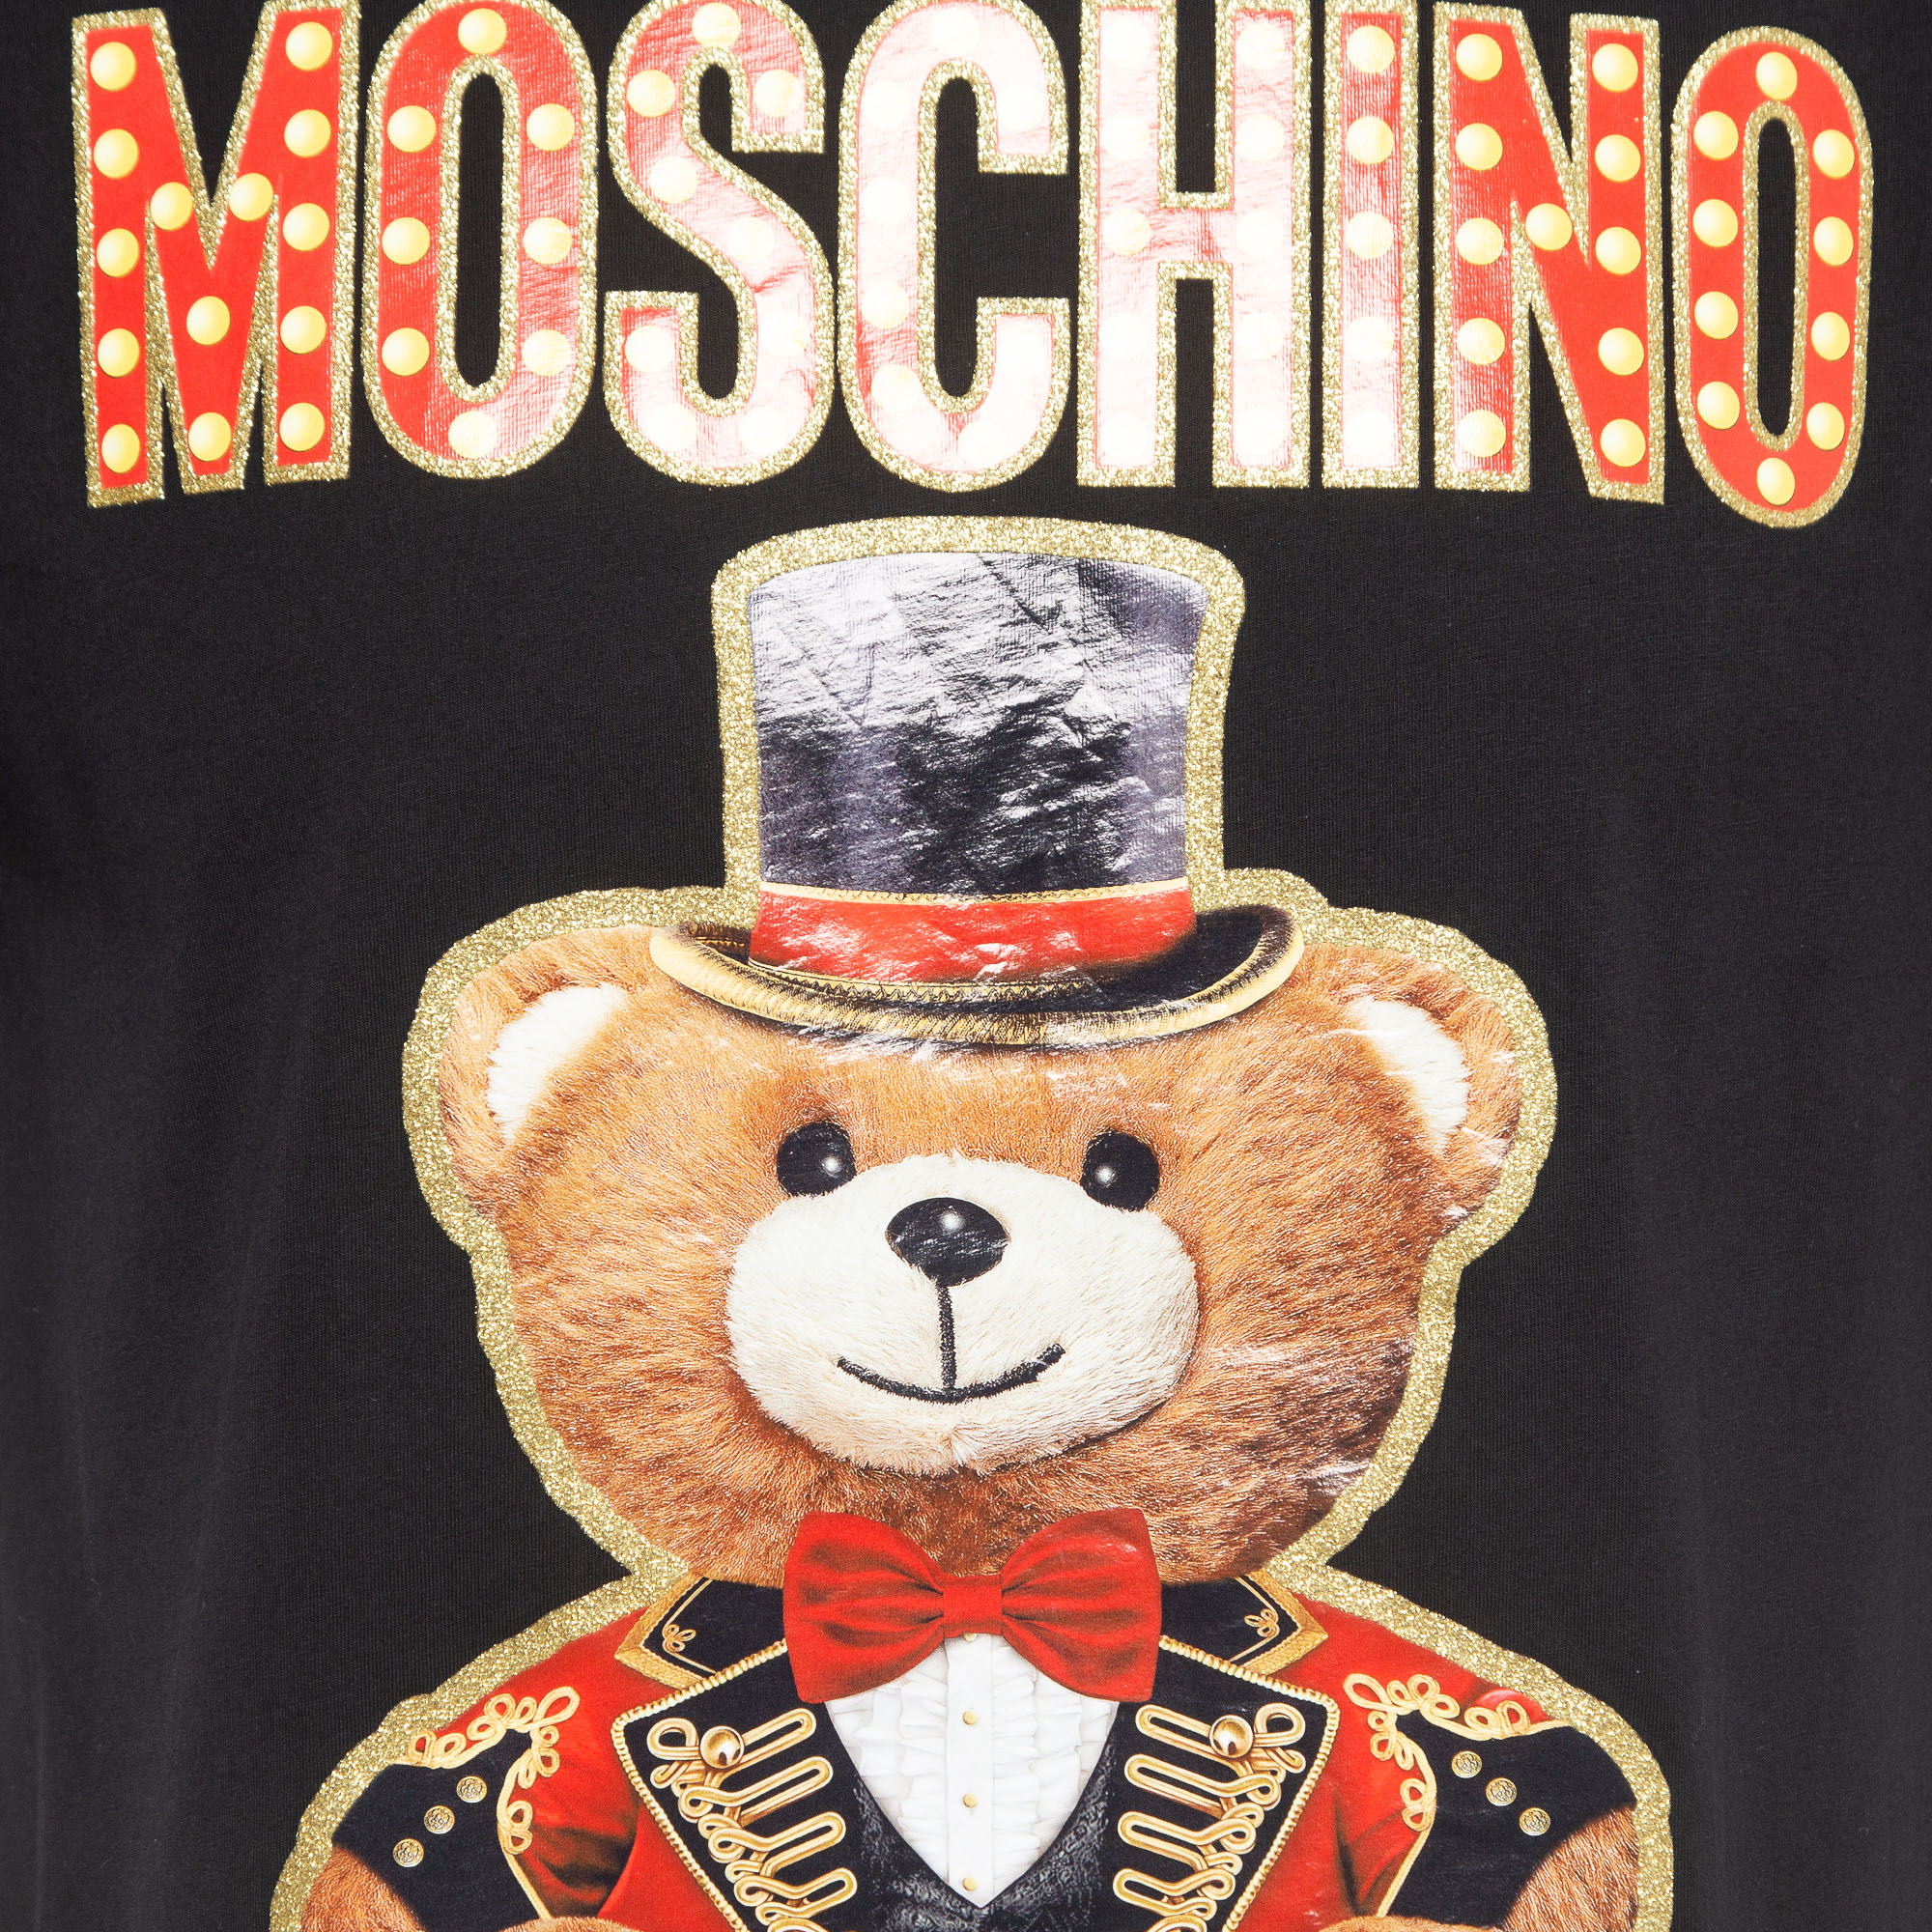 Moschino Couture Black Circus Teddy Printed Cotton T-Shirt L